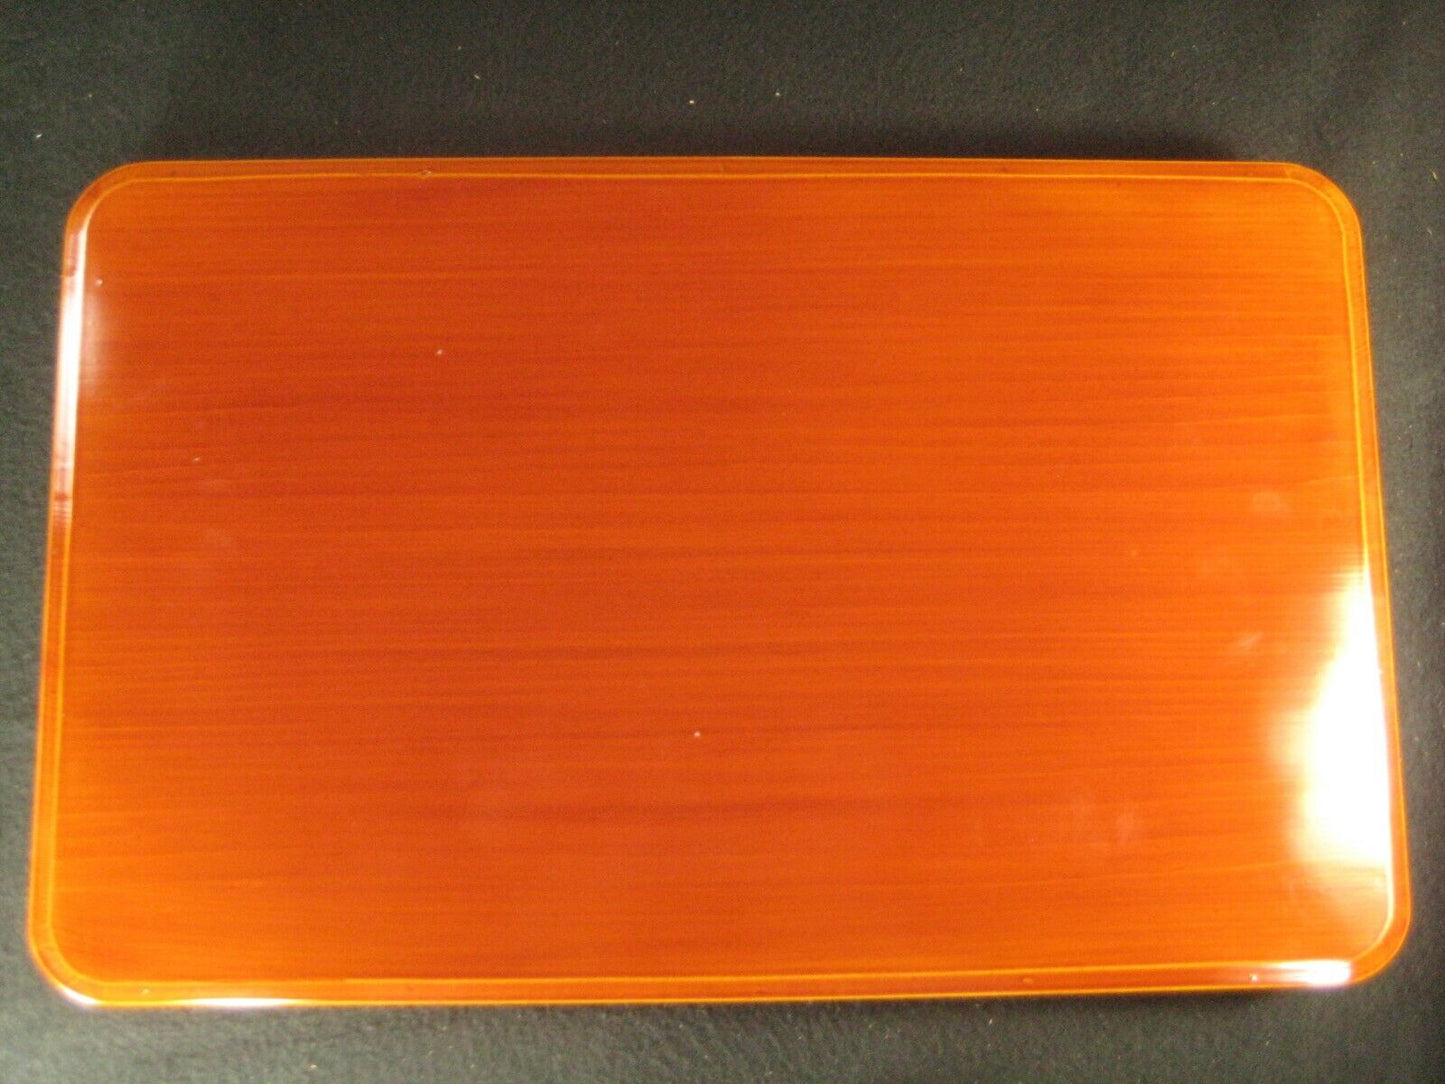 Vintage Japanese Hand Crafted Wood Hida Shunkei Lacquer Tray 18 X 11 1/4"